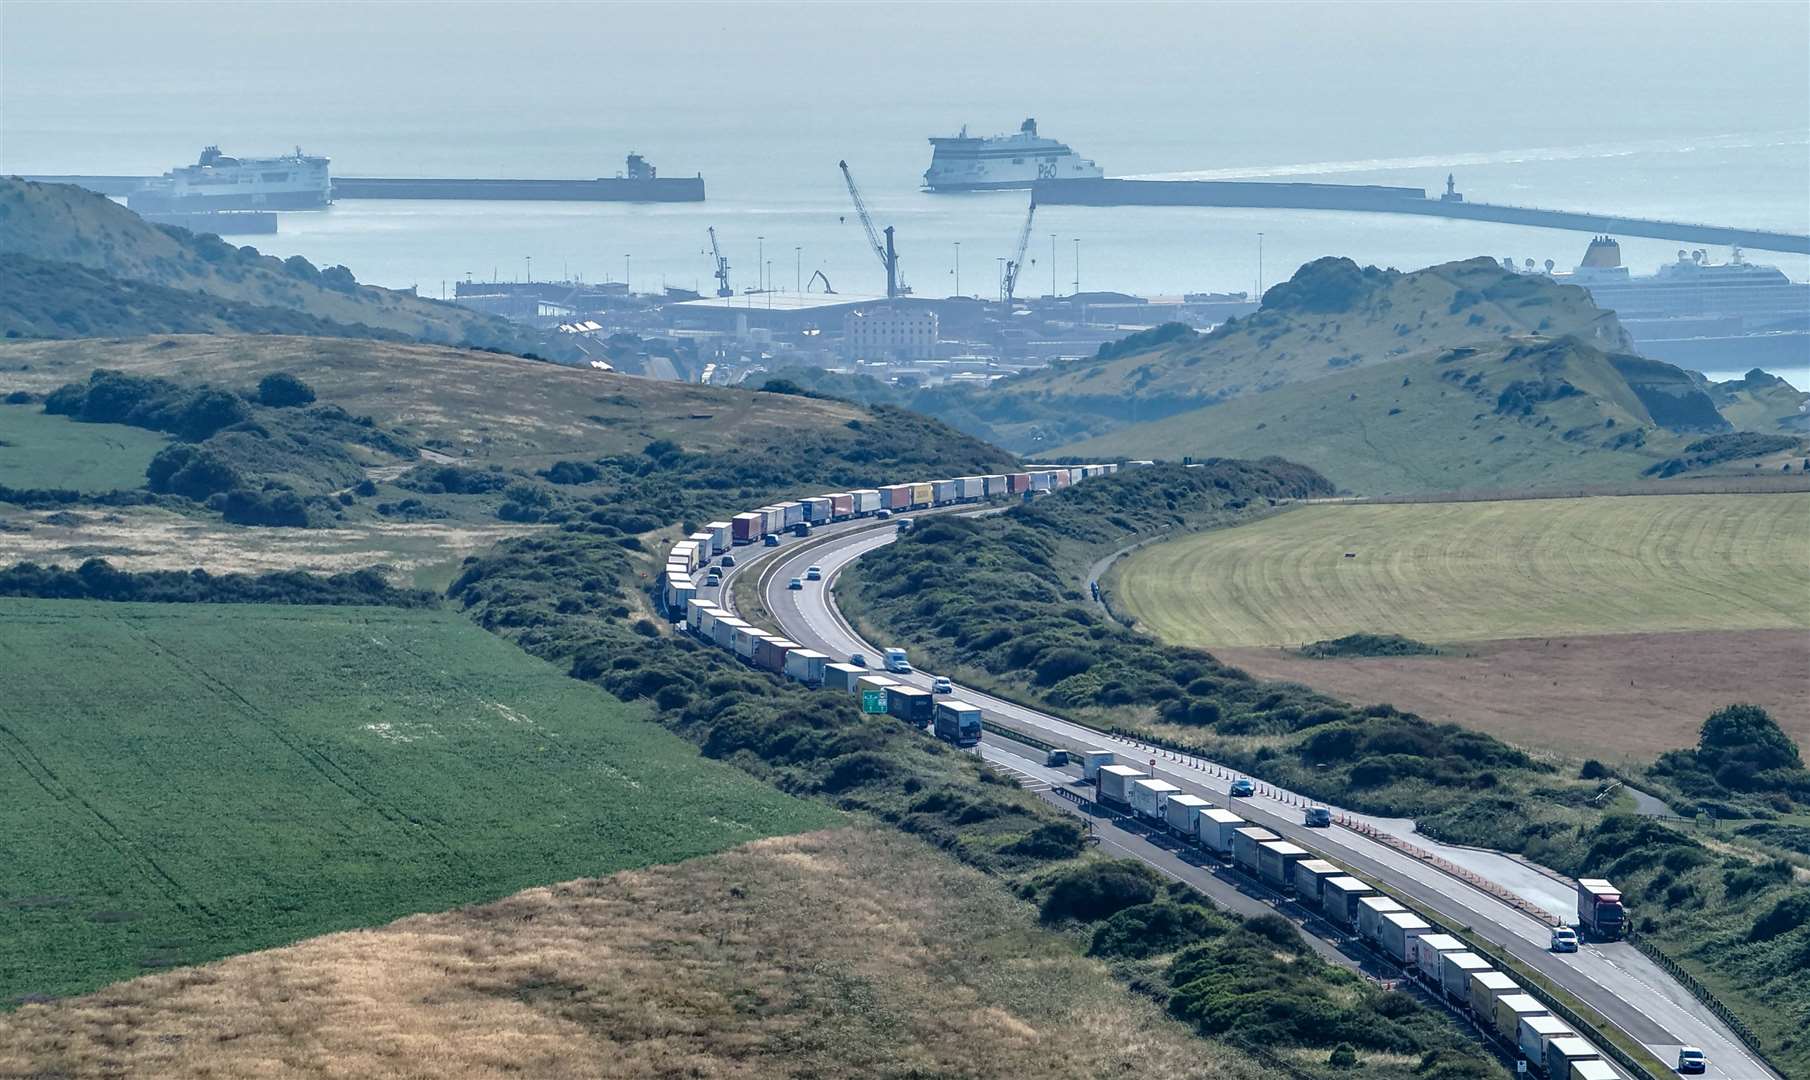 Dover TAP has been implemented on the A20, with hundreds of lorries queuing outside the town. Picture: UKNIP